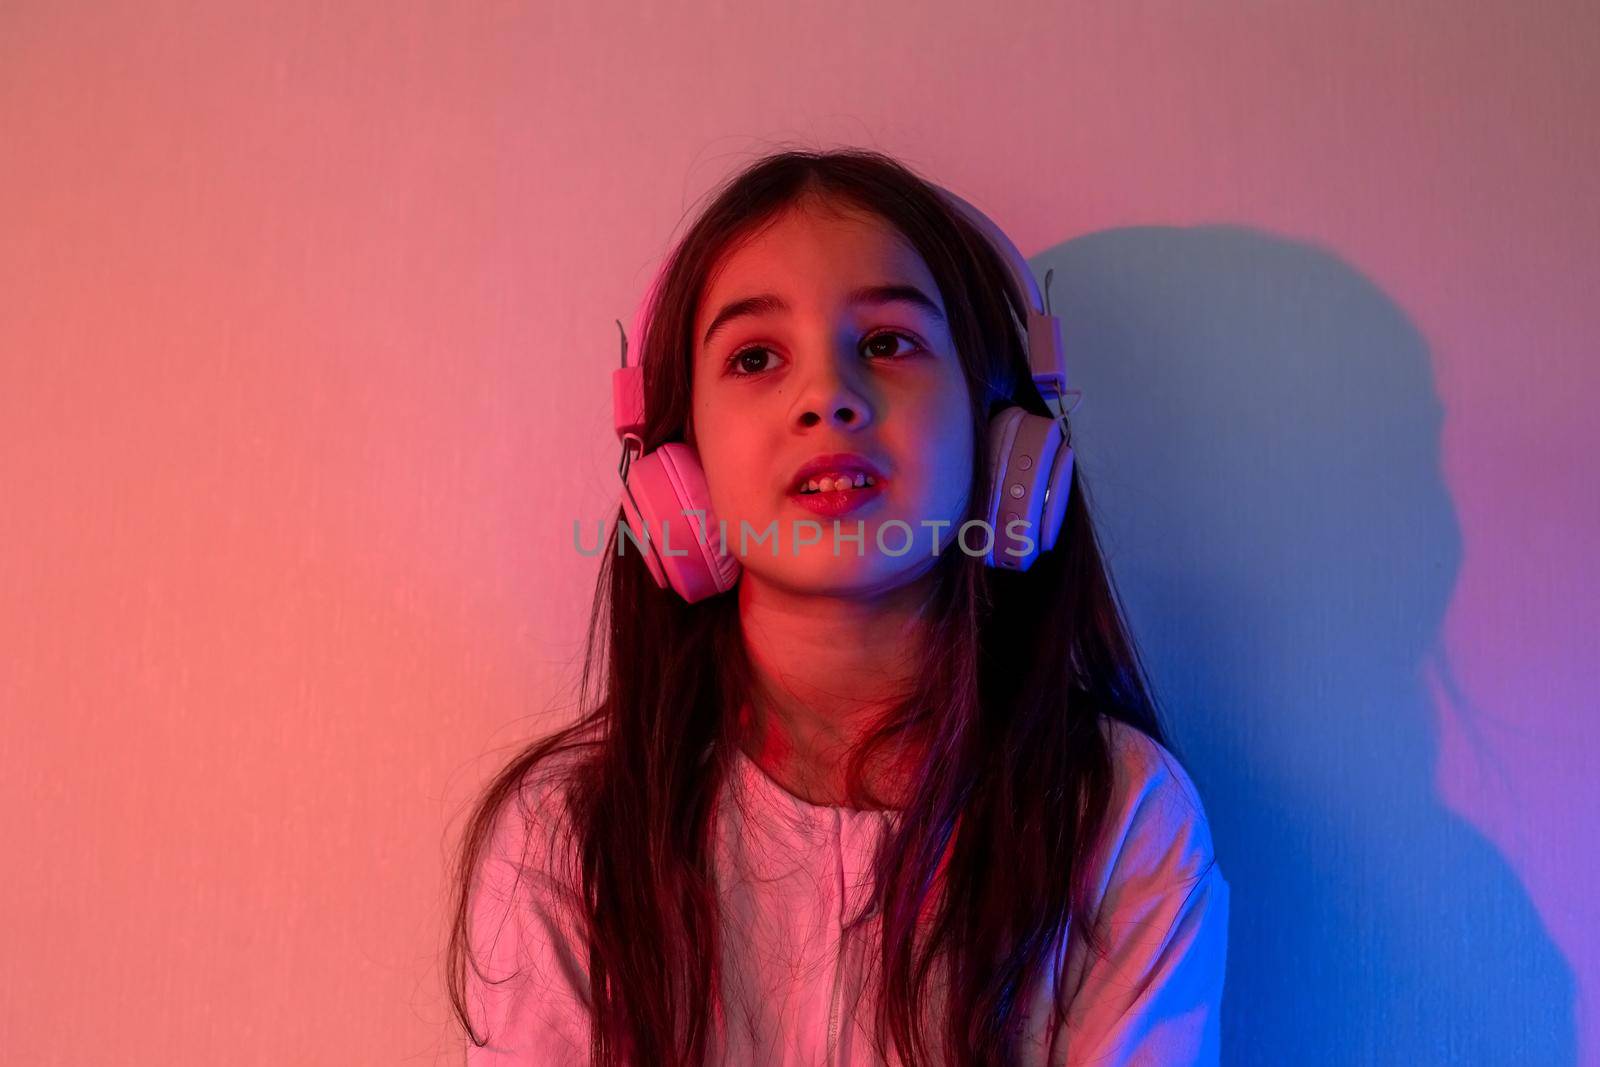 Portrait of a cute little girl in pink headphones, with loose dark hair, listening to music in neon pink blue light